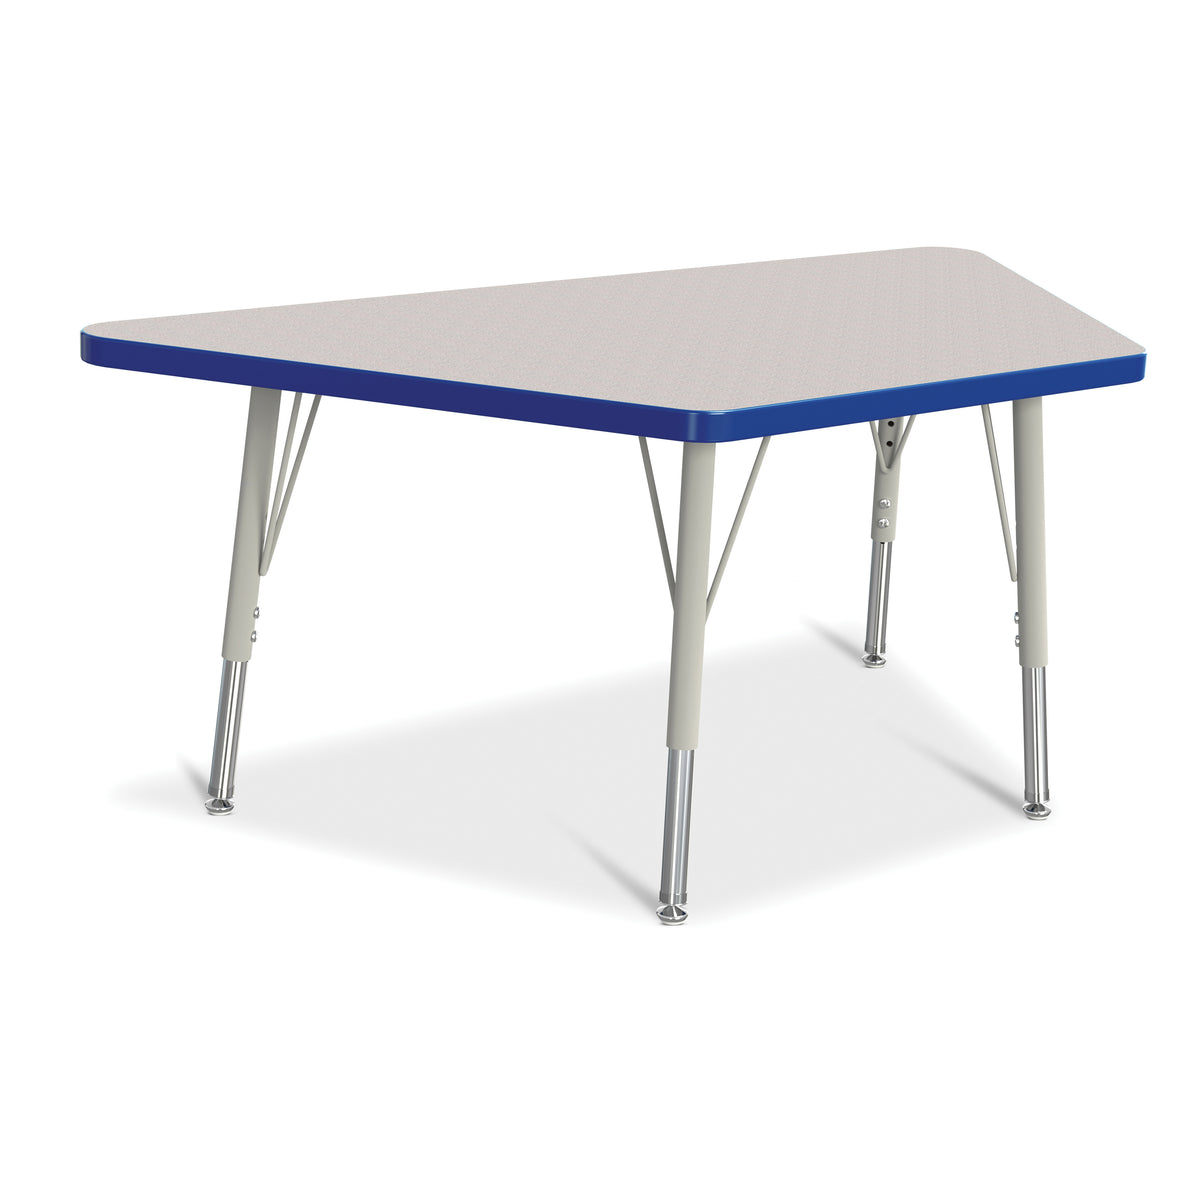 6438JCE003, Berries Trapezoid Activity Tables - 24" X 48", E-height - Freckled Gray/Blue/Gray